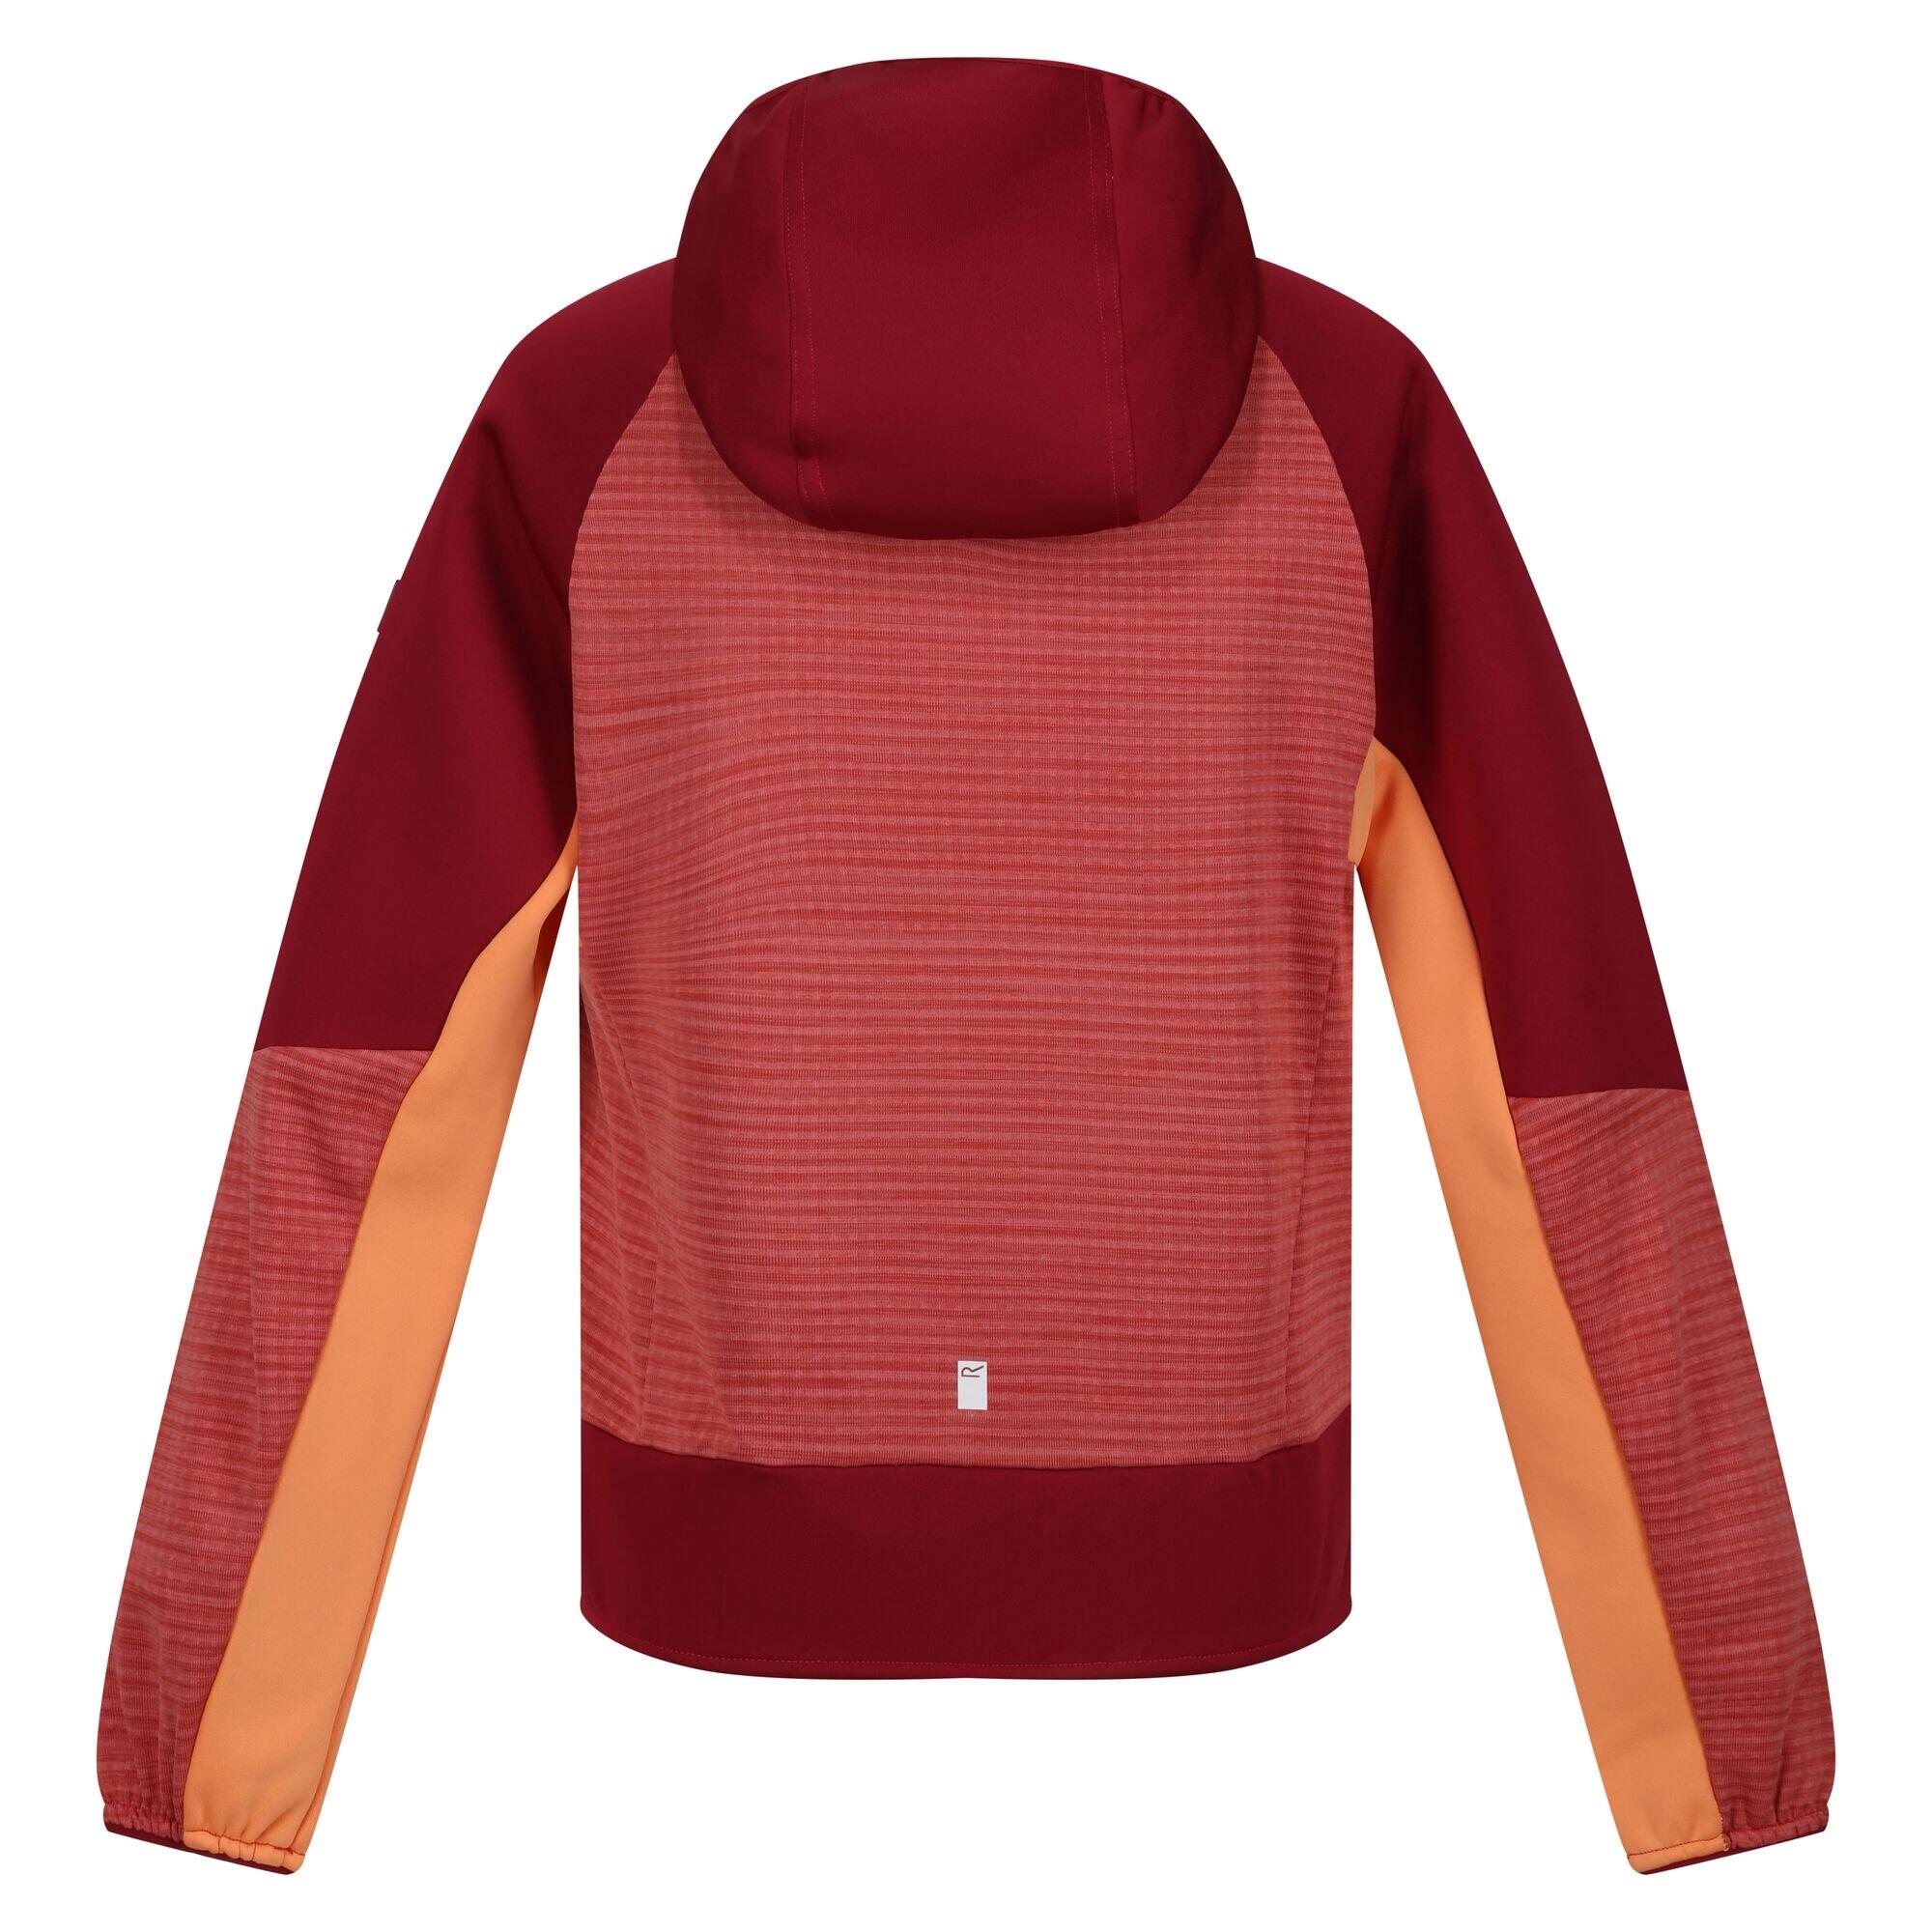 Childrens/Kids Prenton II Hooded Soft Shell Jacket (Mineral Red/Rumba Red) 2/5